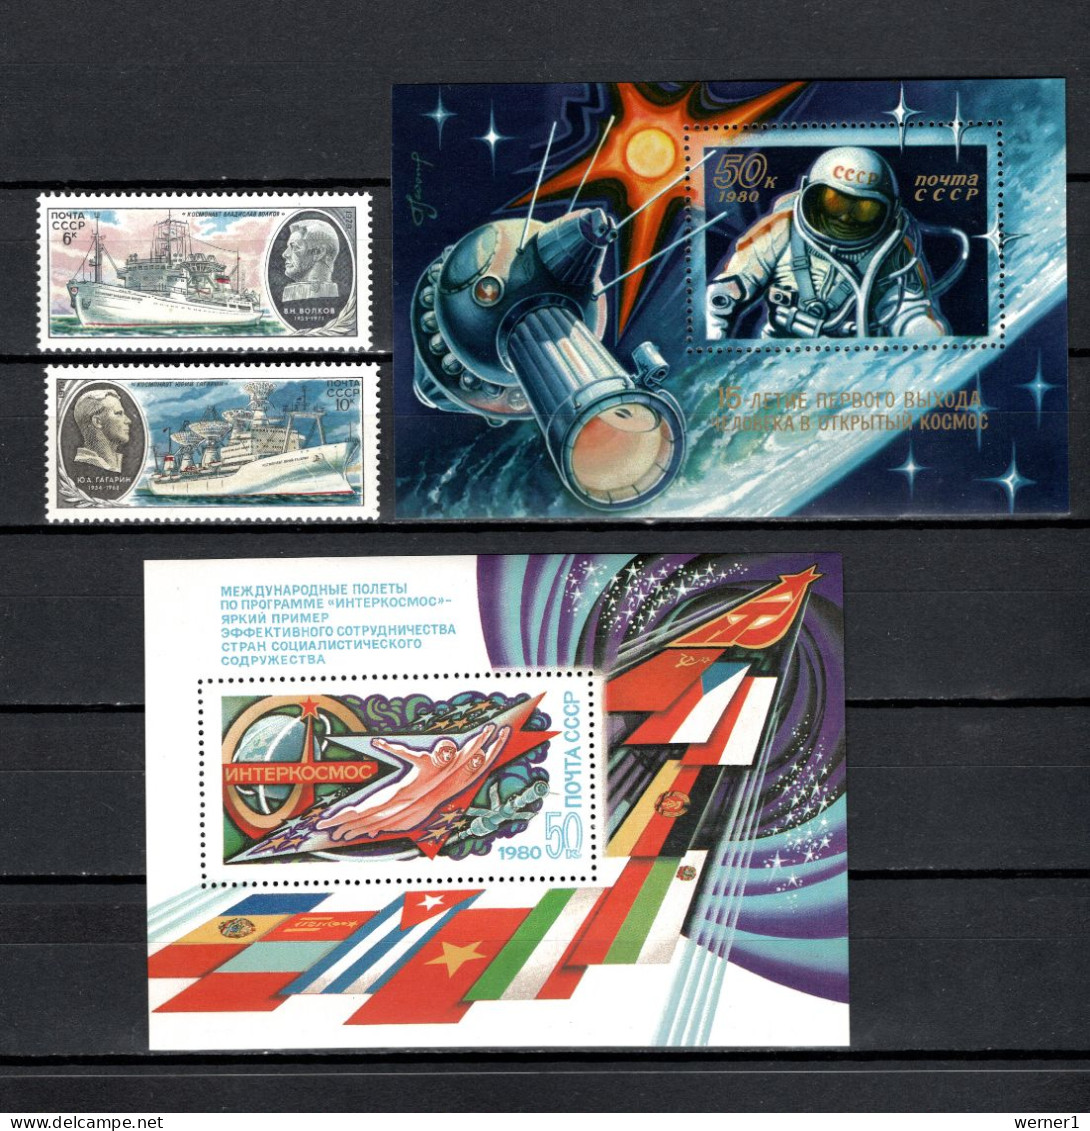 USSR Russia 1979/1980 Space, Ships, Aleksej Leonov, Interkosmos, 2 Stamps + 2 S/s MNH - Russia & USSR